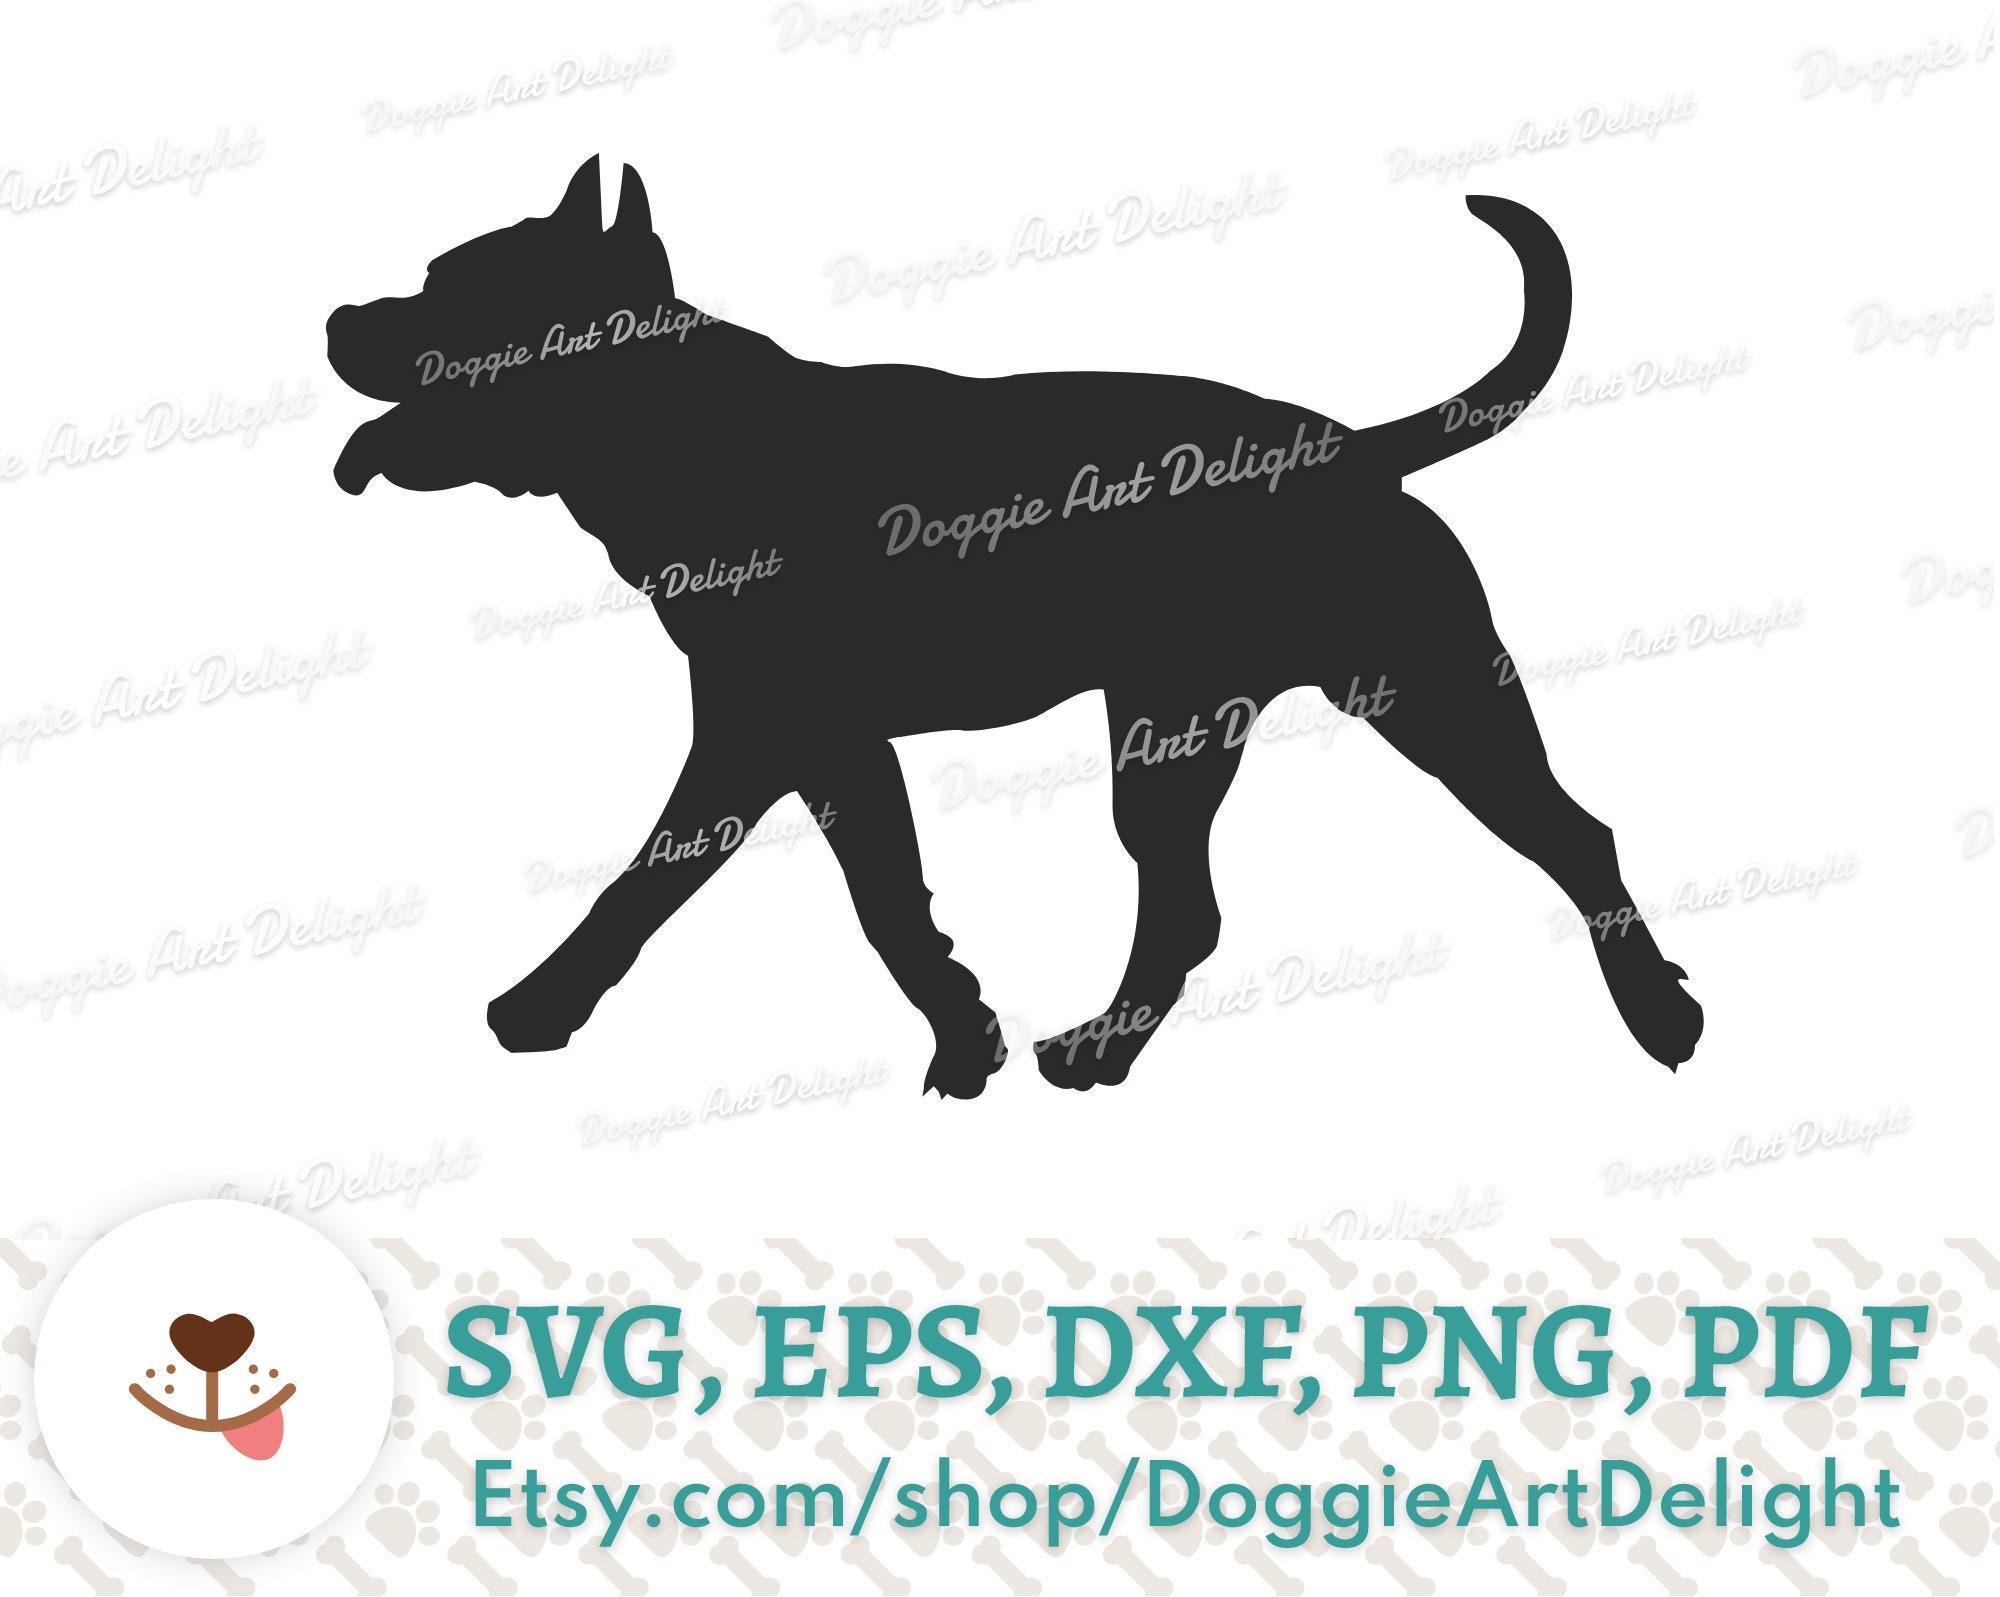 Staffy Dog Silhouette Svg File For Cricut American New Zealand | lupon